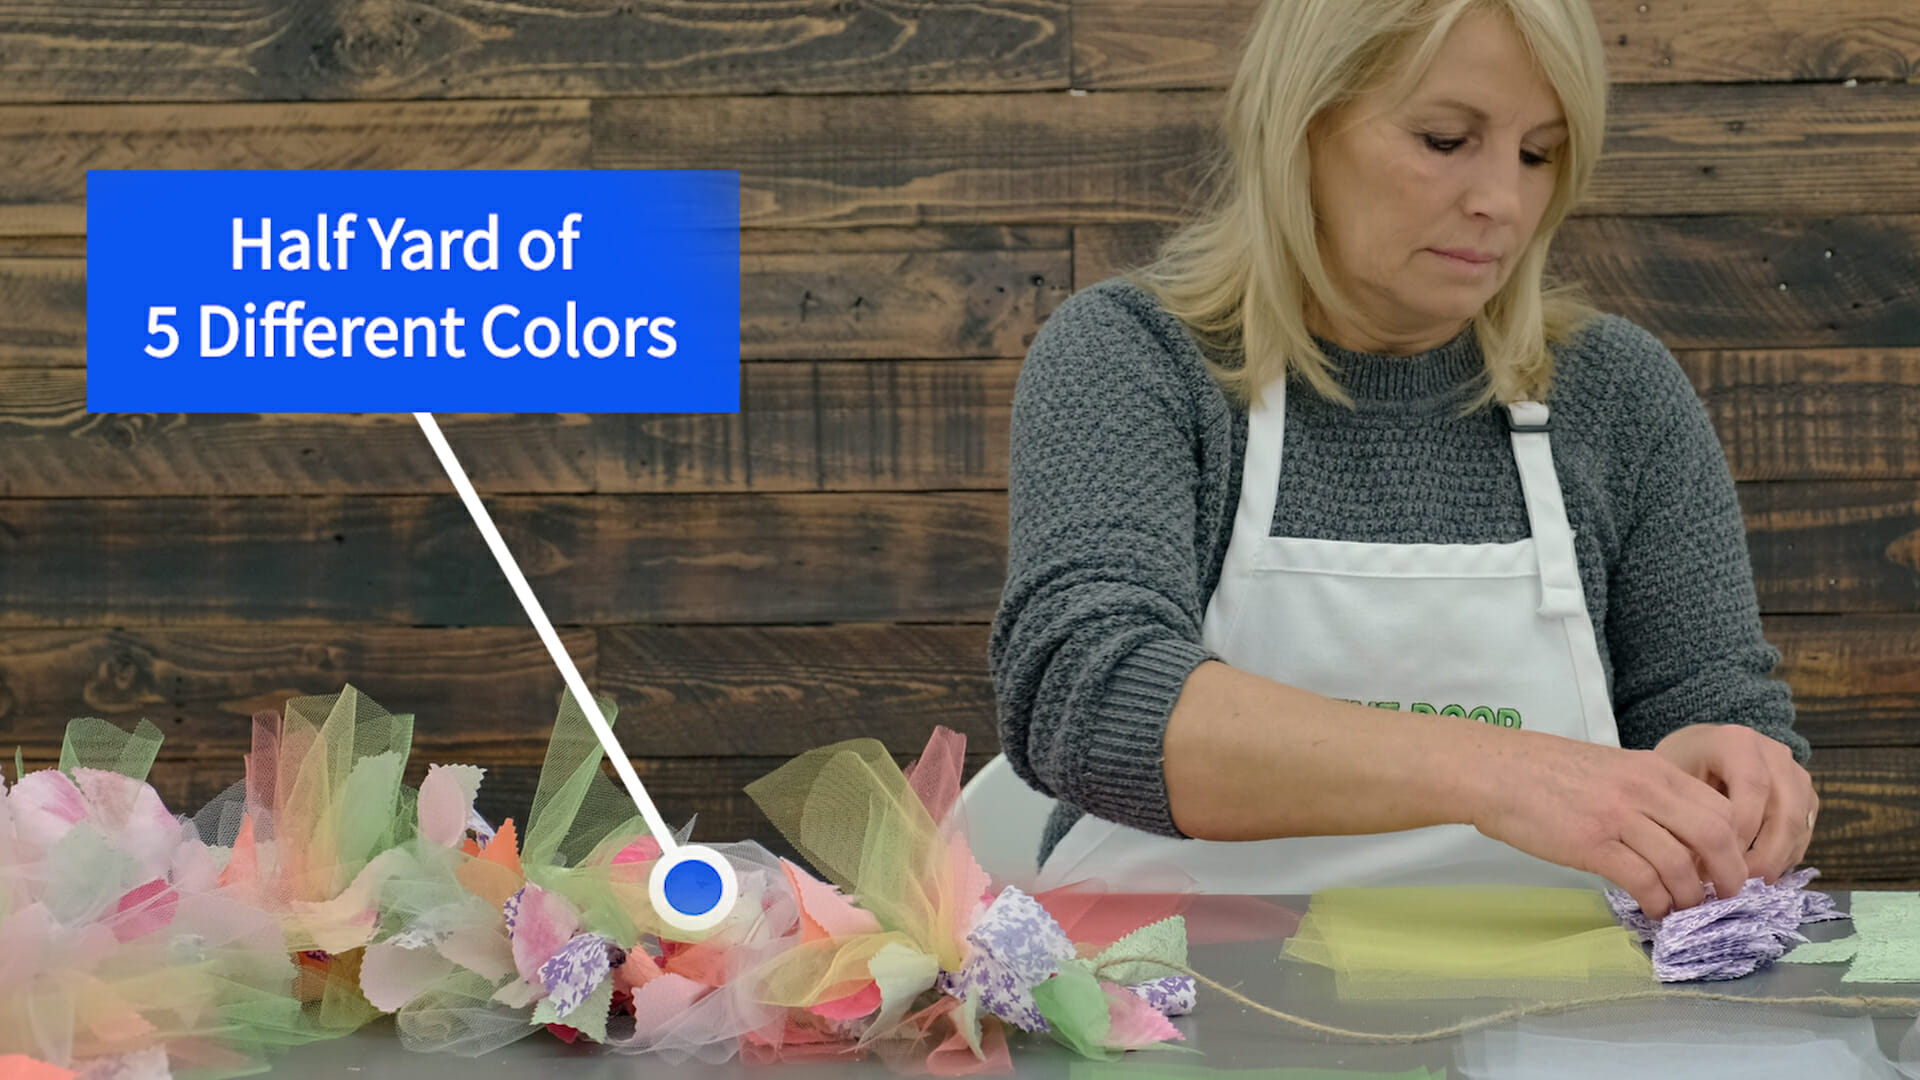 Half Yard of 5 Different Colors – A woman assembling colorful squares of tulle and calico into bunches for a wreath.